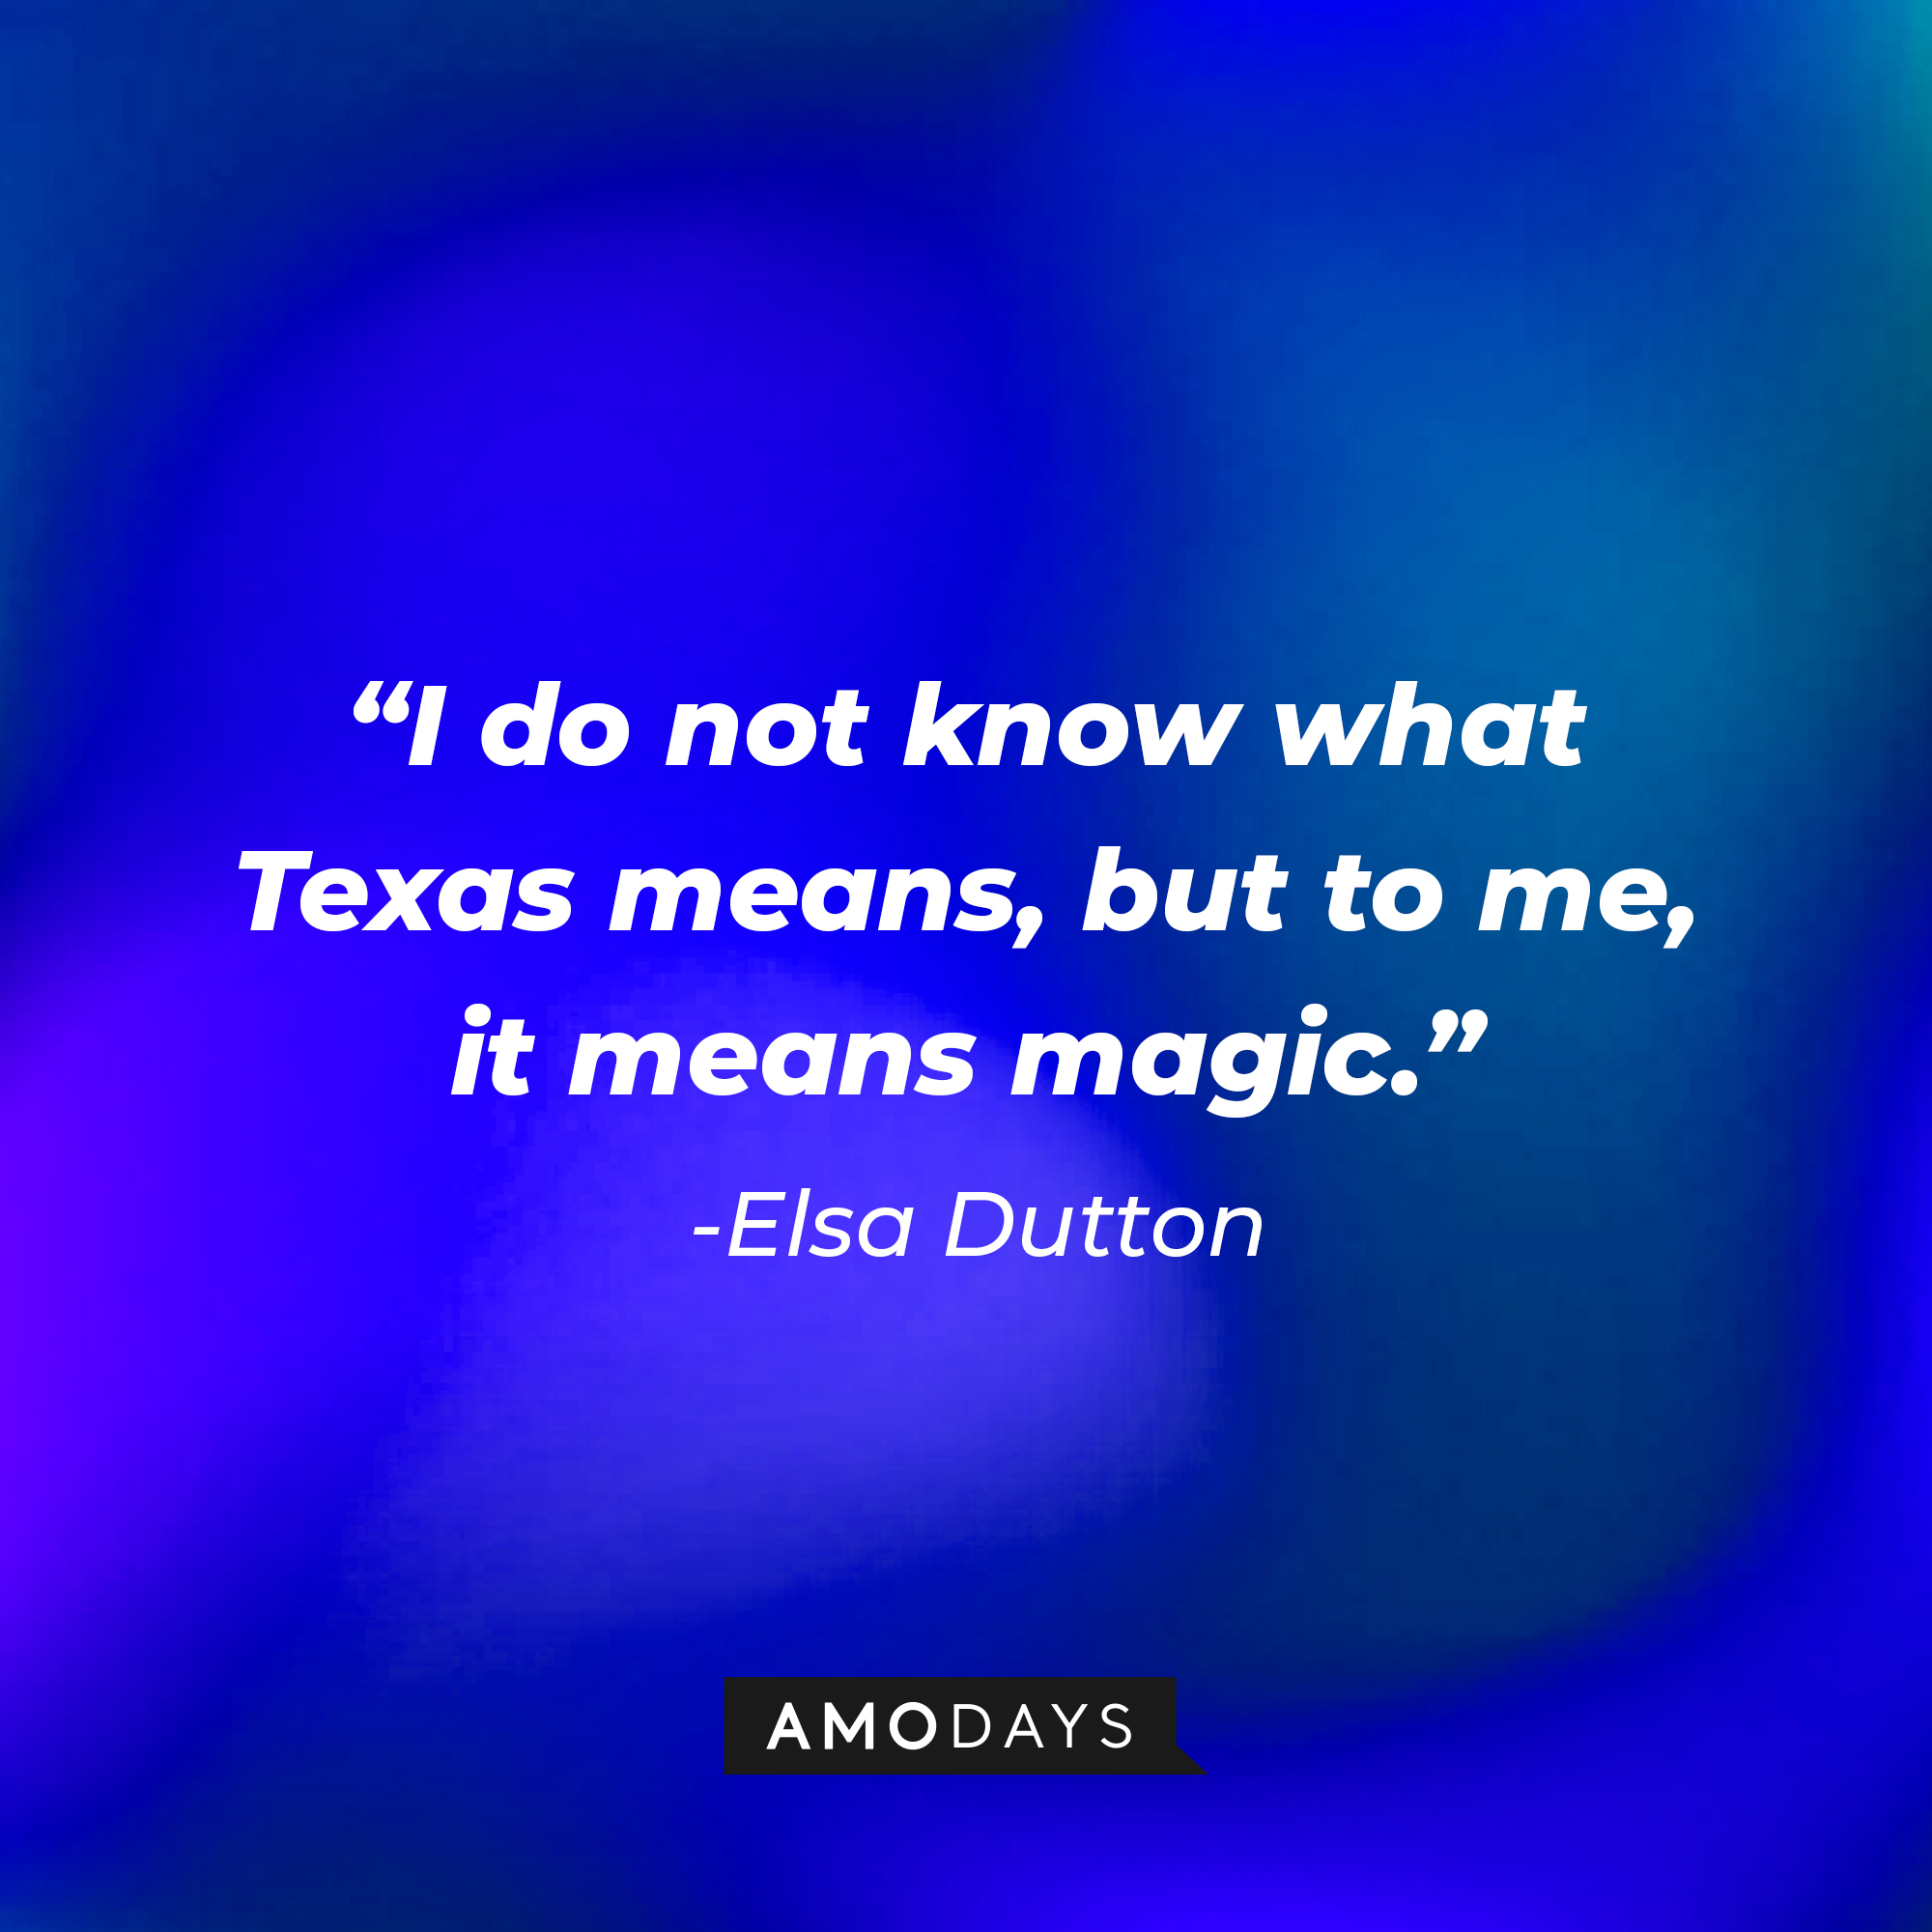 Elsa Dutton's quote: "I do not know what Texas means, but to me, it means magic." | Source: AmoDays